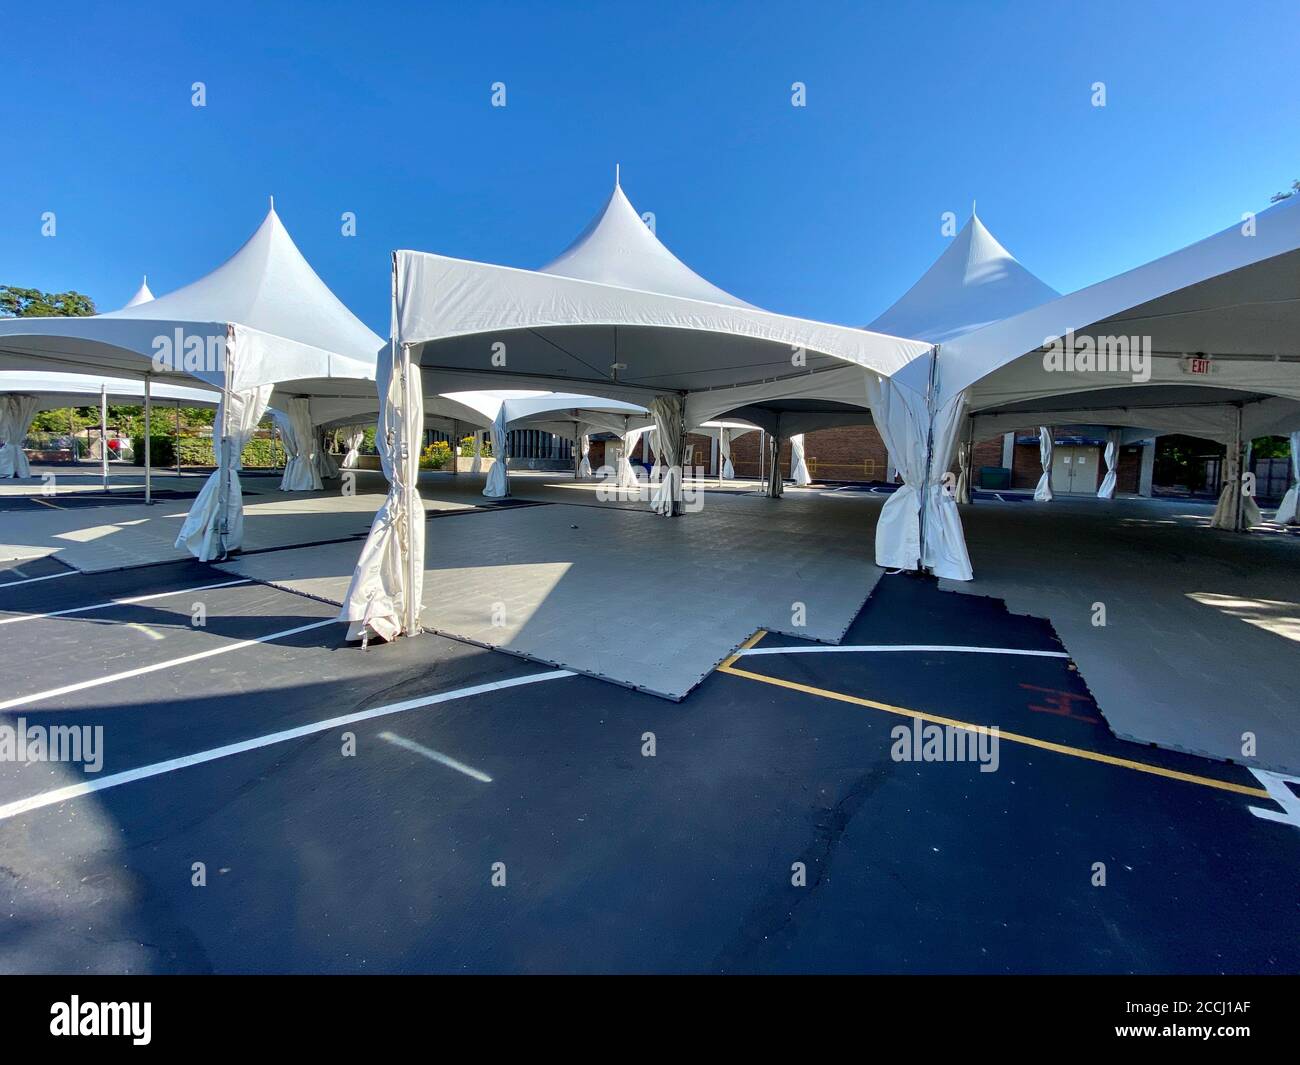 Schools prepare for in-person learning by constructing tents on the blacktop for outdoor classrooms during the Coronavirus pandemic. Stock Photo